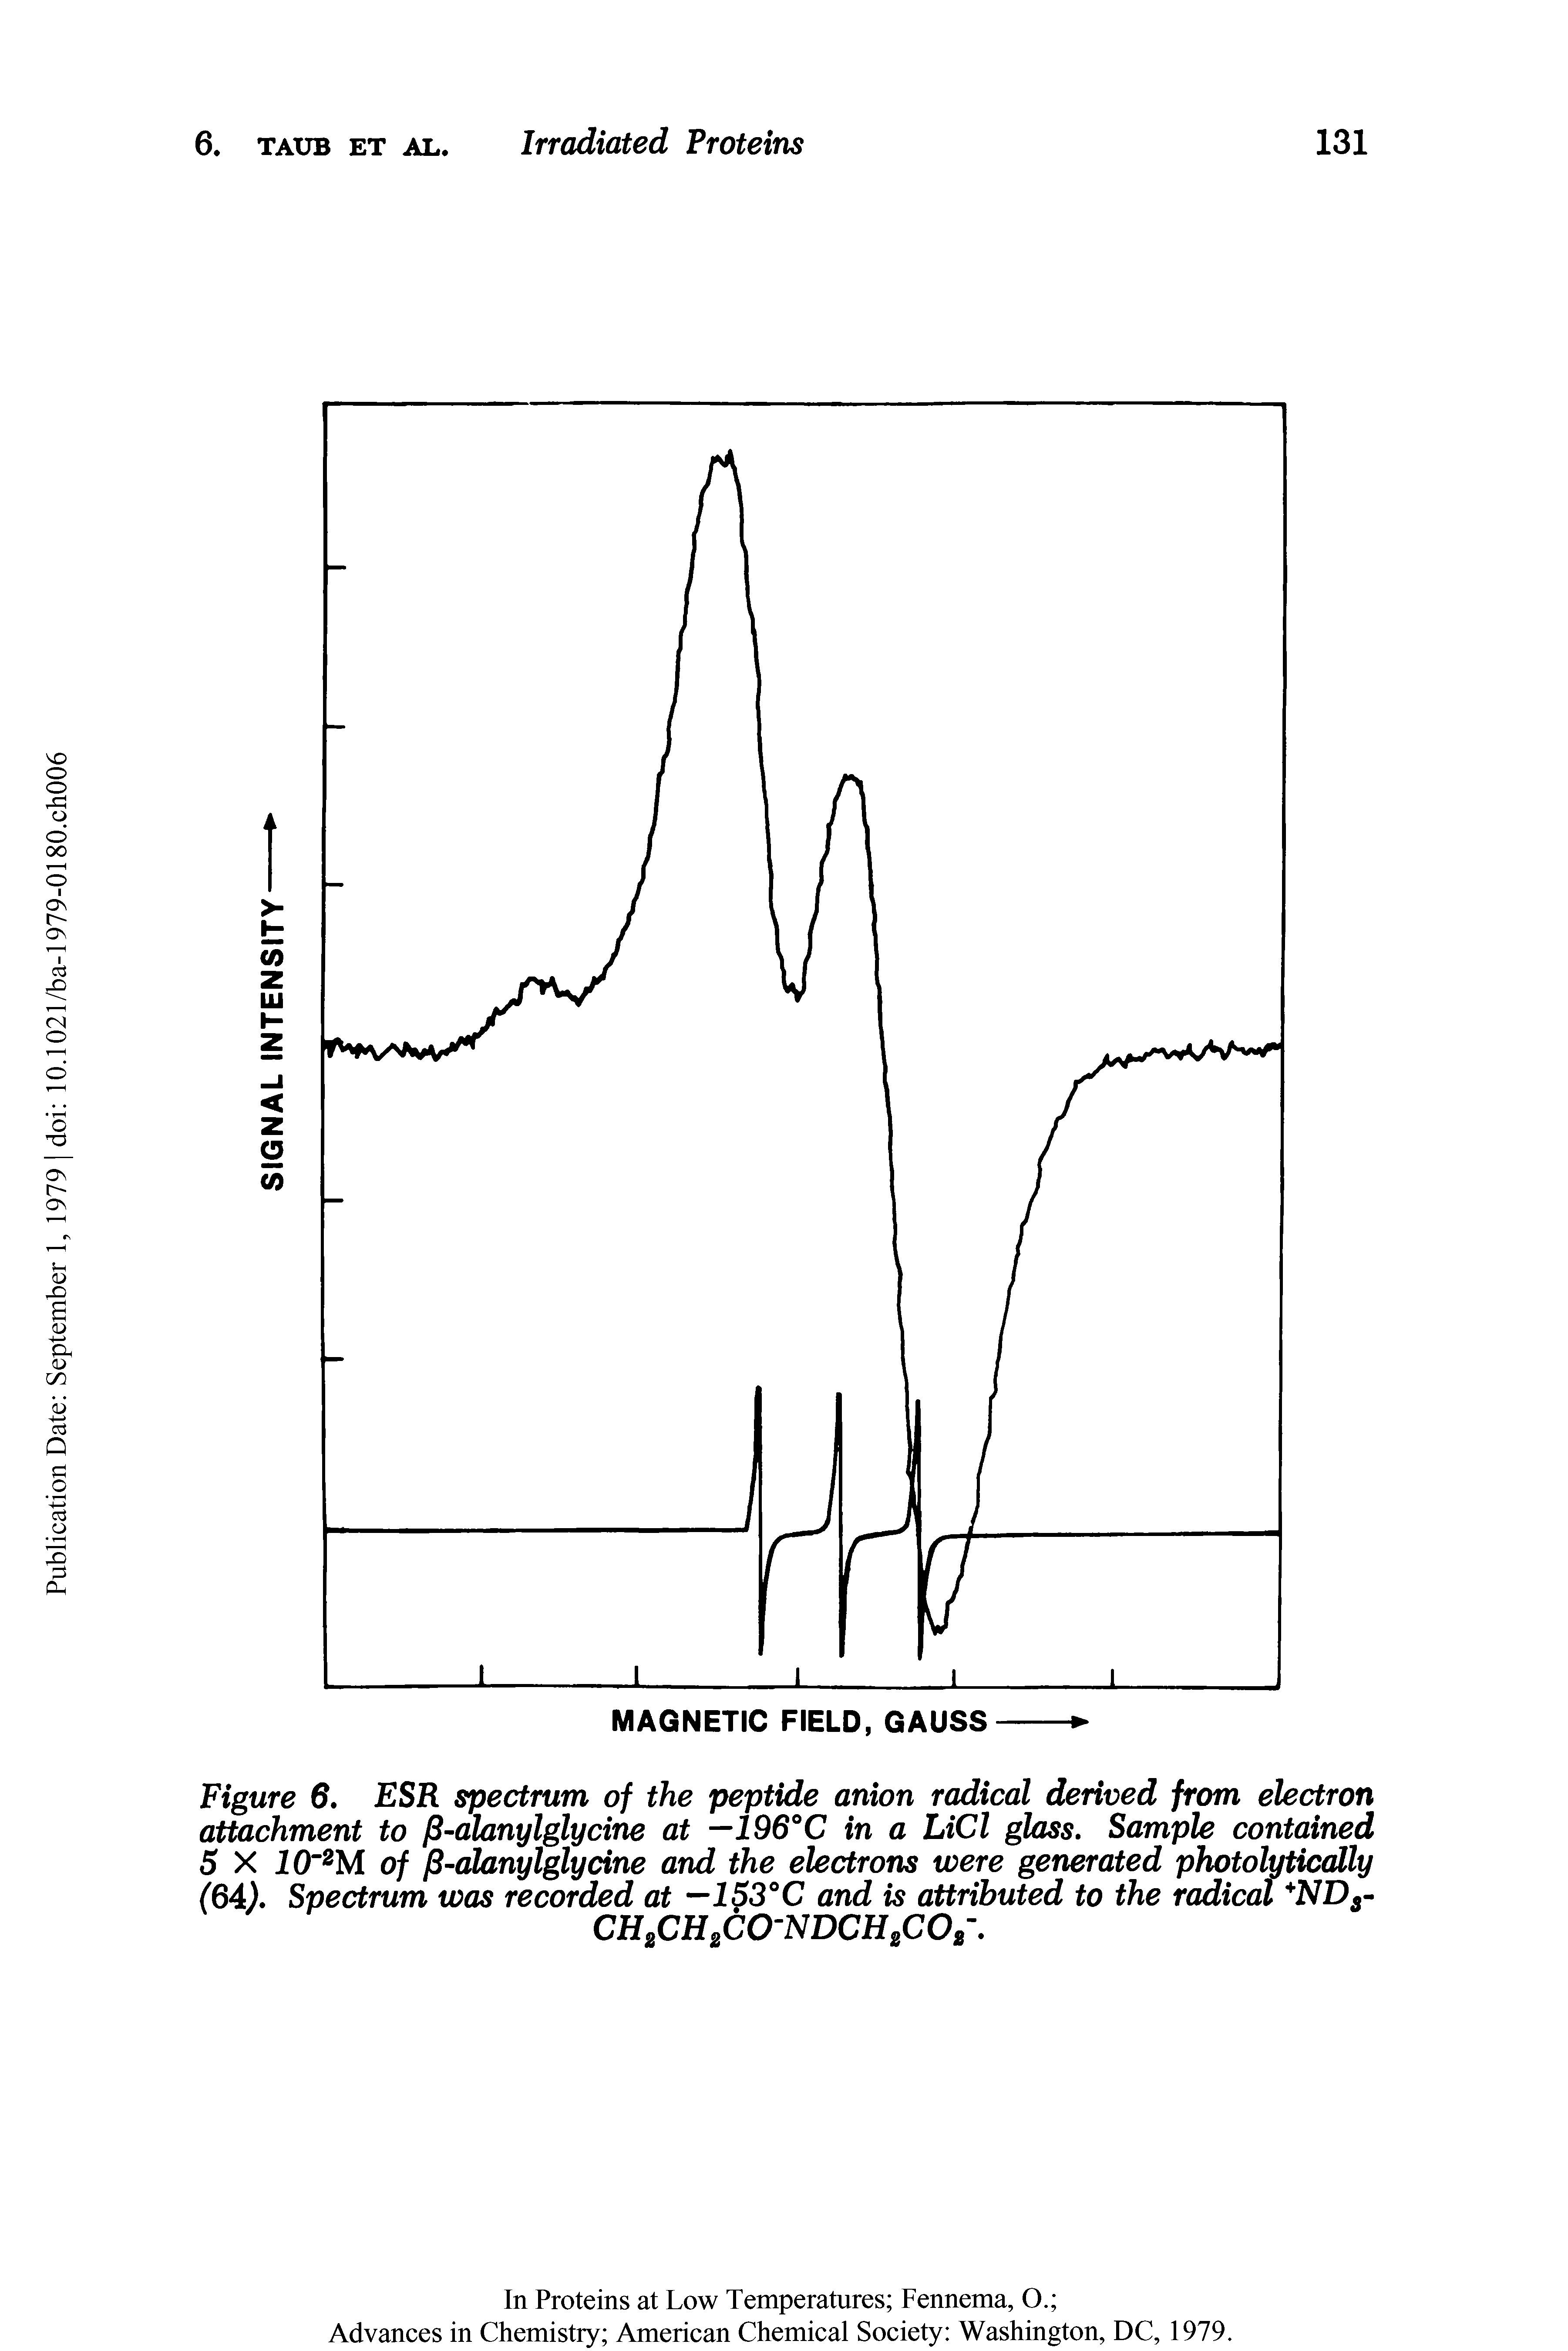 Figure 6. ESR spectrum of the peptide anion radical derived from electron attachment to fl-alanylglycine at —196°C in a LiCl glass. Sample contained 5 X 10r2M of ft-alanylglycine and the electrons were generated photolutically (64). Spectrum was recorded at —153°C and is attributed to the radical NDS-...